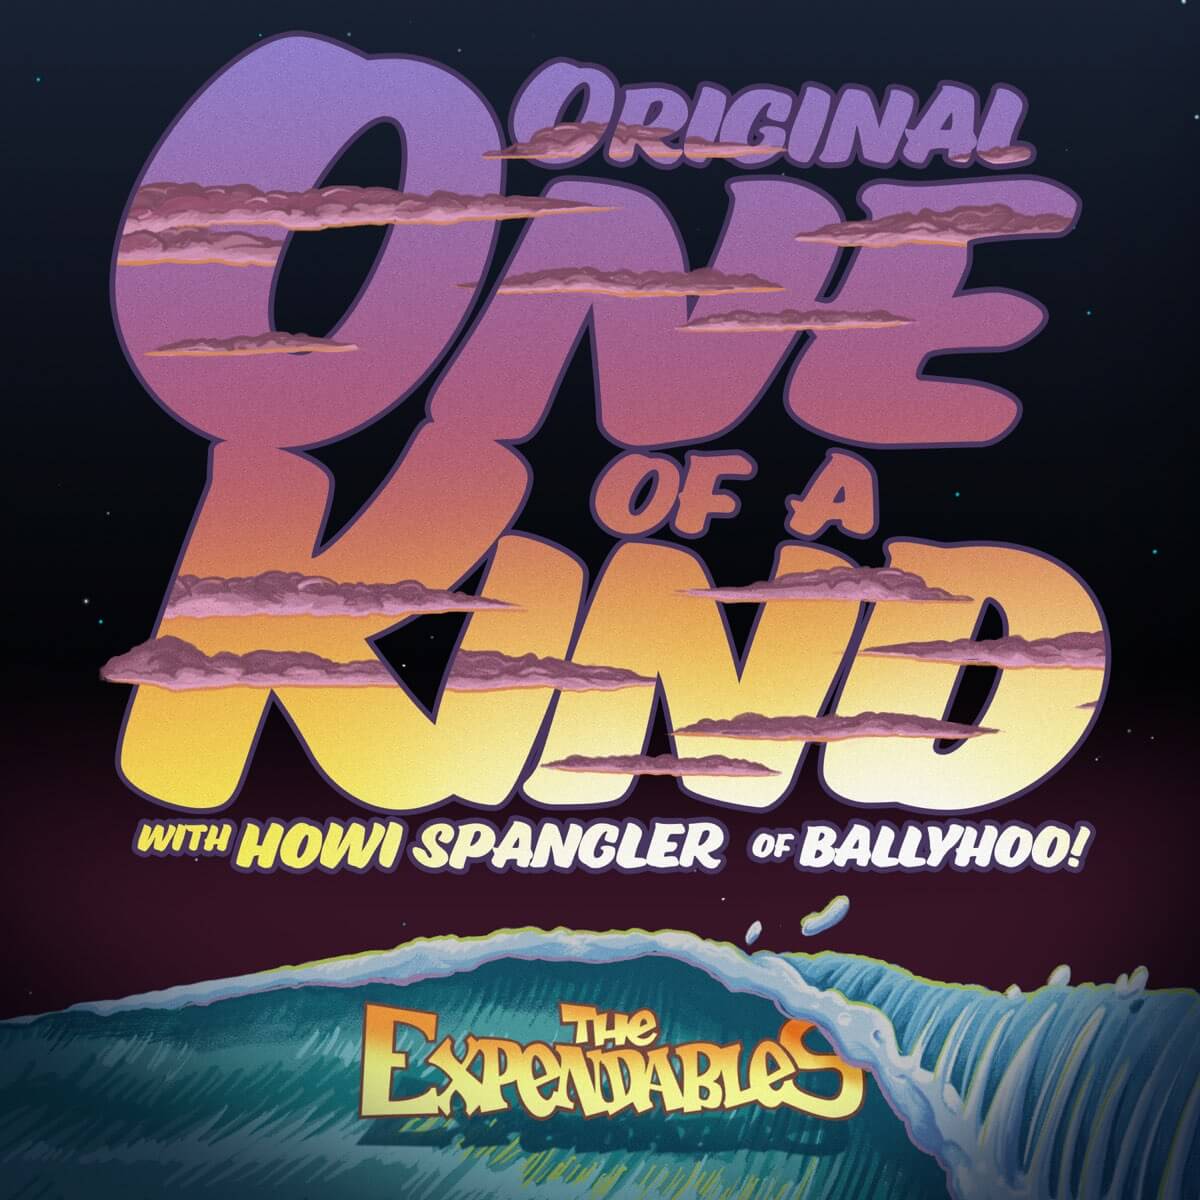 The Expendables and Ballyhoo! Release New Single "Original One of a Kind"